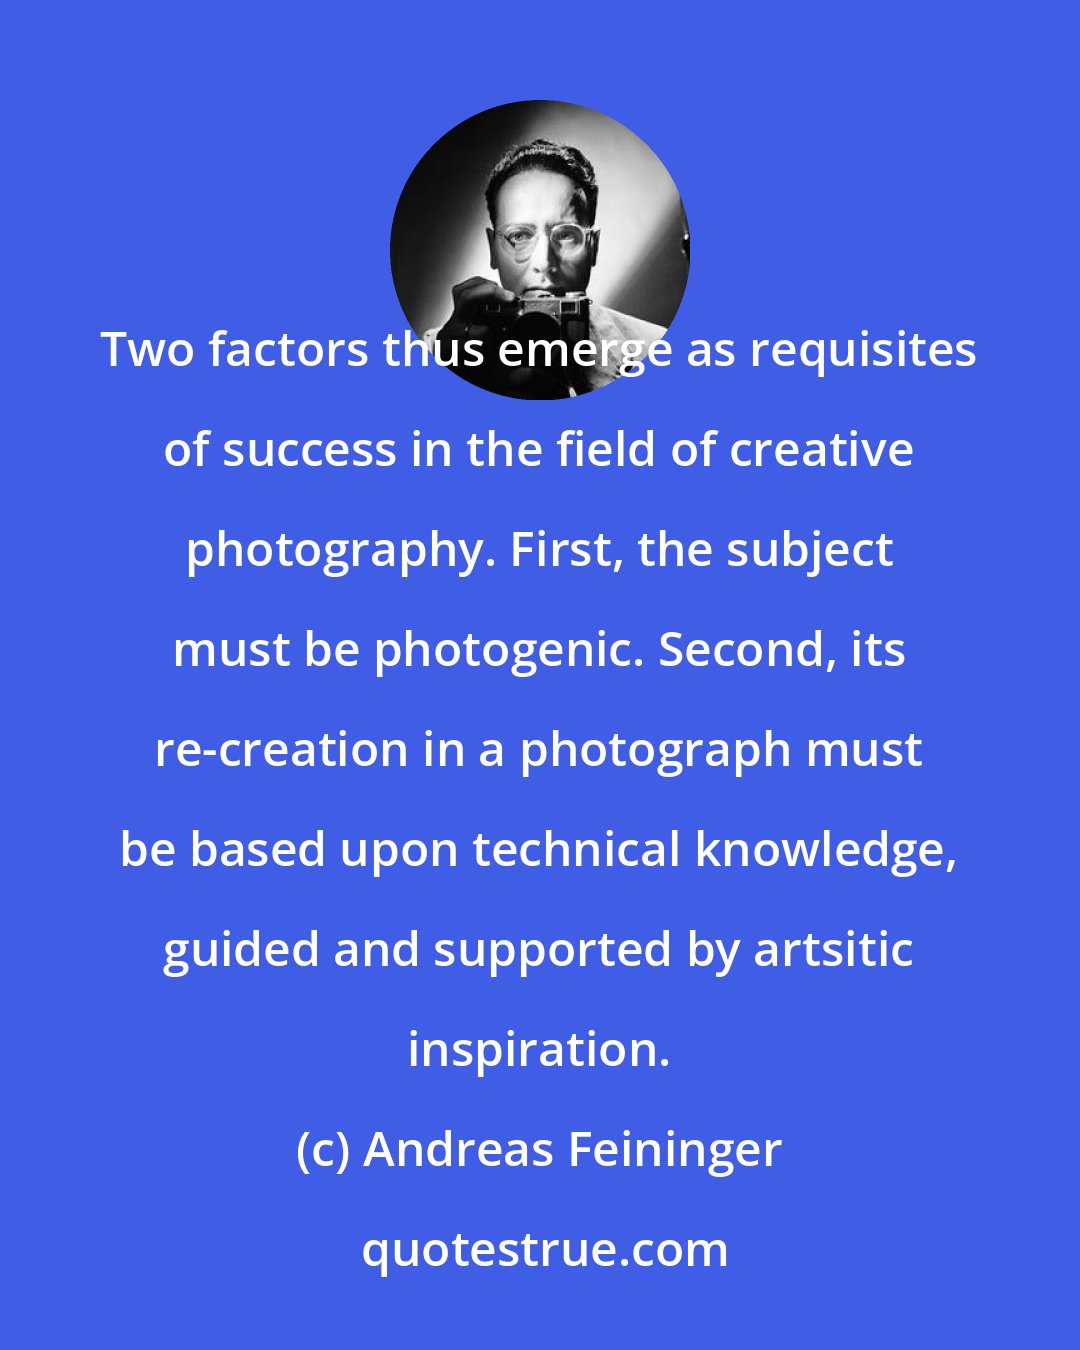 Andreas Feininger: Two factors thus emerge as requisites of success in the field of creative photography. First, the subject must be photogenic. Second, its re-creation in a photograph must be based upon technical knowledge, guided and supported by artsitic inspiration.